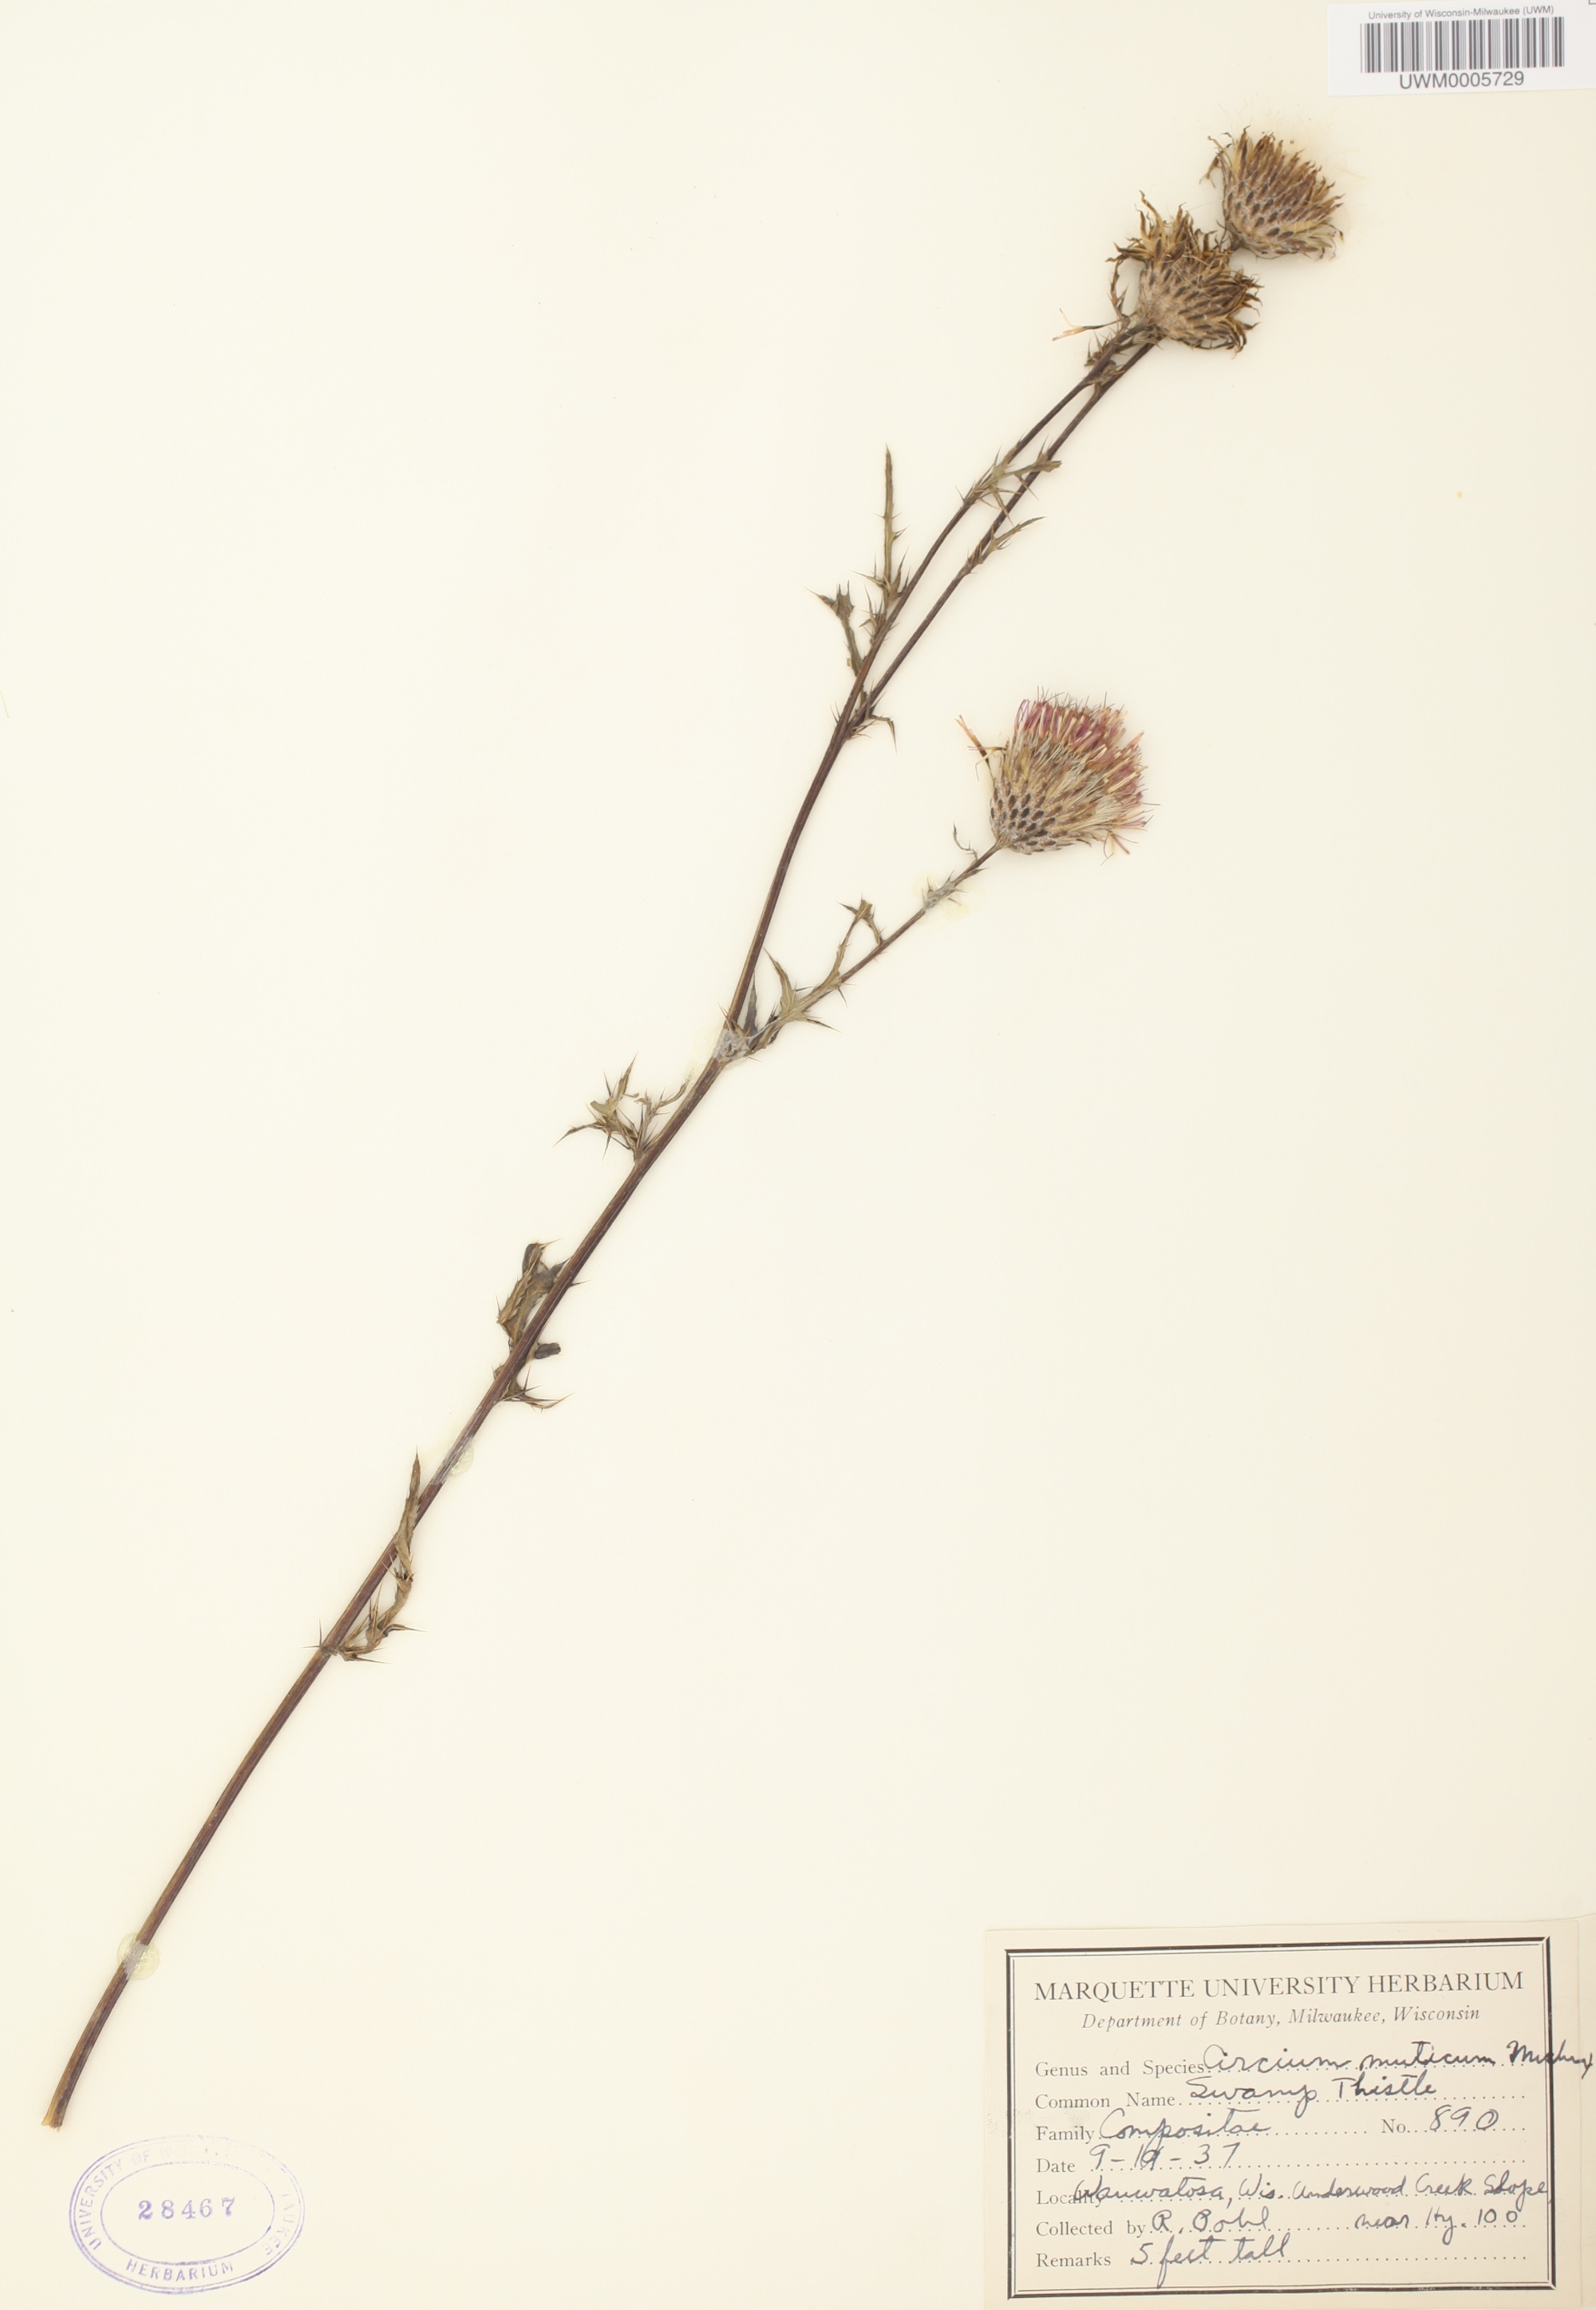 Swamp Thistle (Cirsium muticum) specimen collected in Wauwatosa, Wisconsin on September 19, 1937.